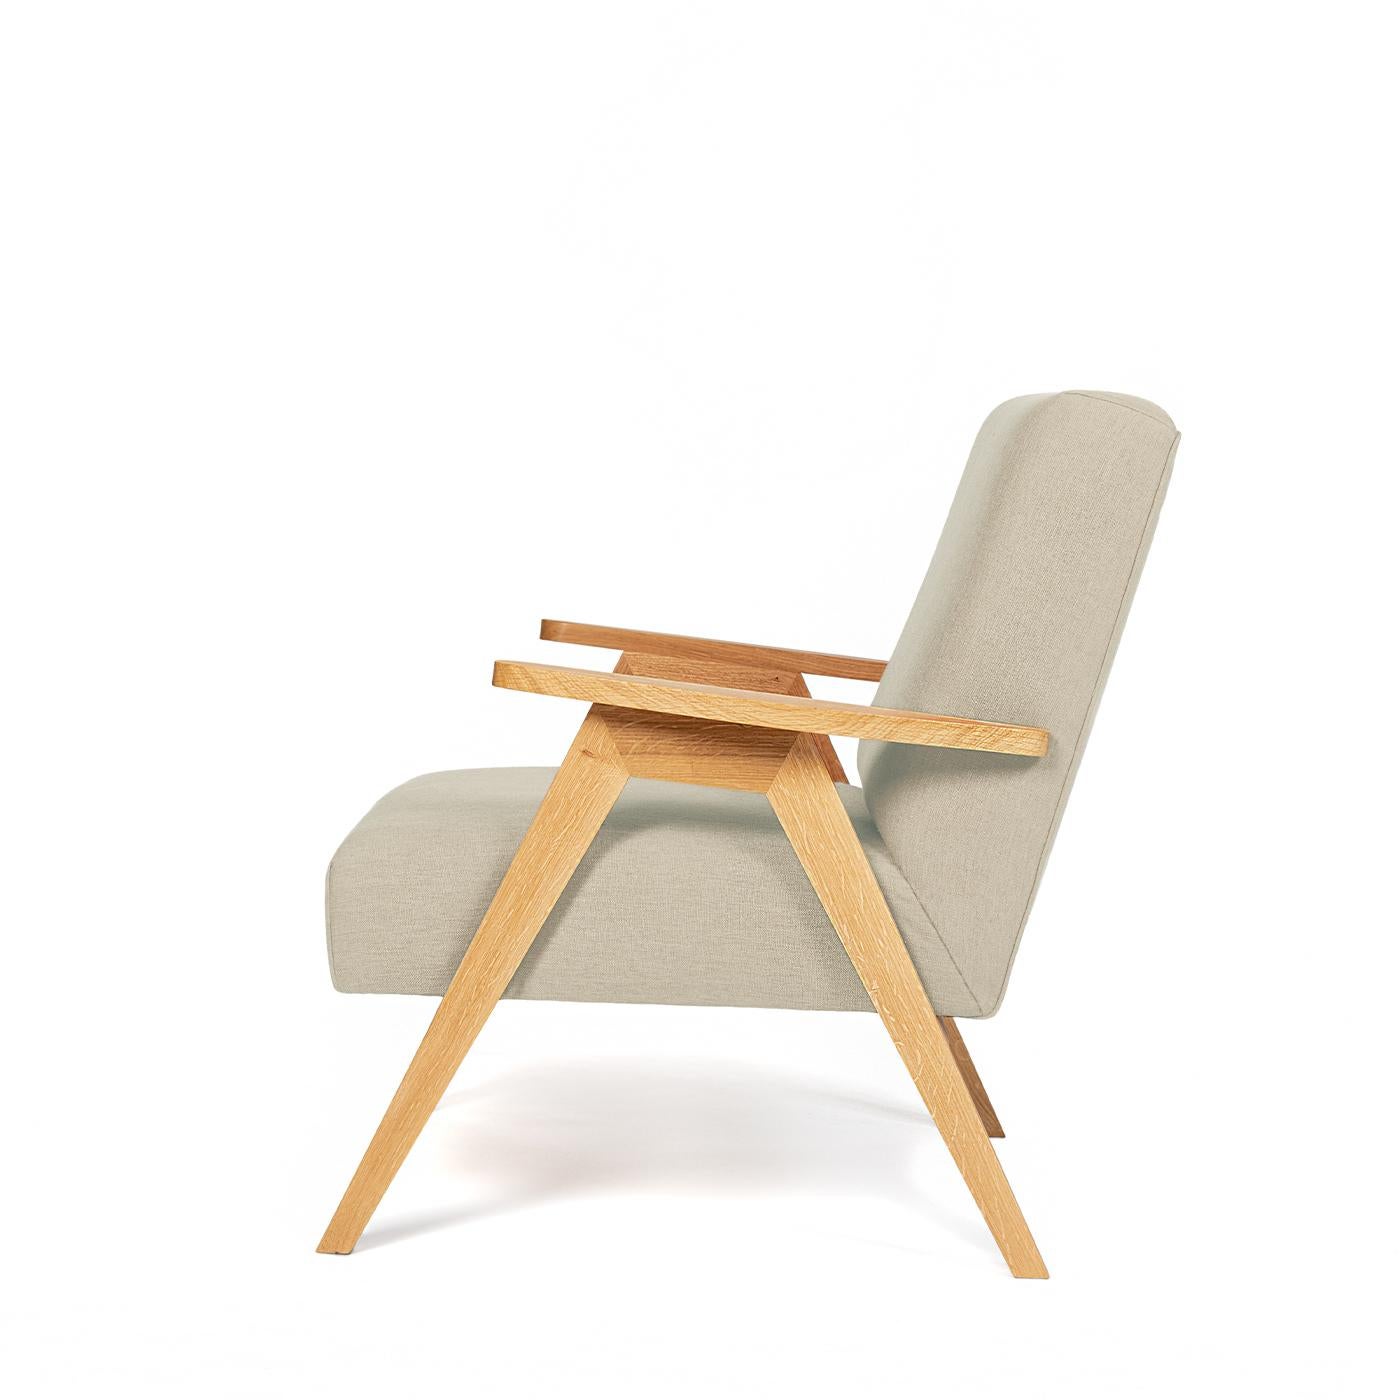 Sink into this comfy, modern armchair with a solid oak structure and an oil-based varnish finish for a clean, simple look. The chair's seat and back structure are in plywood and have foam padding inside for a soft feeling. The non-removable seat